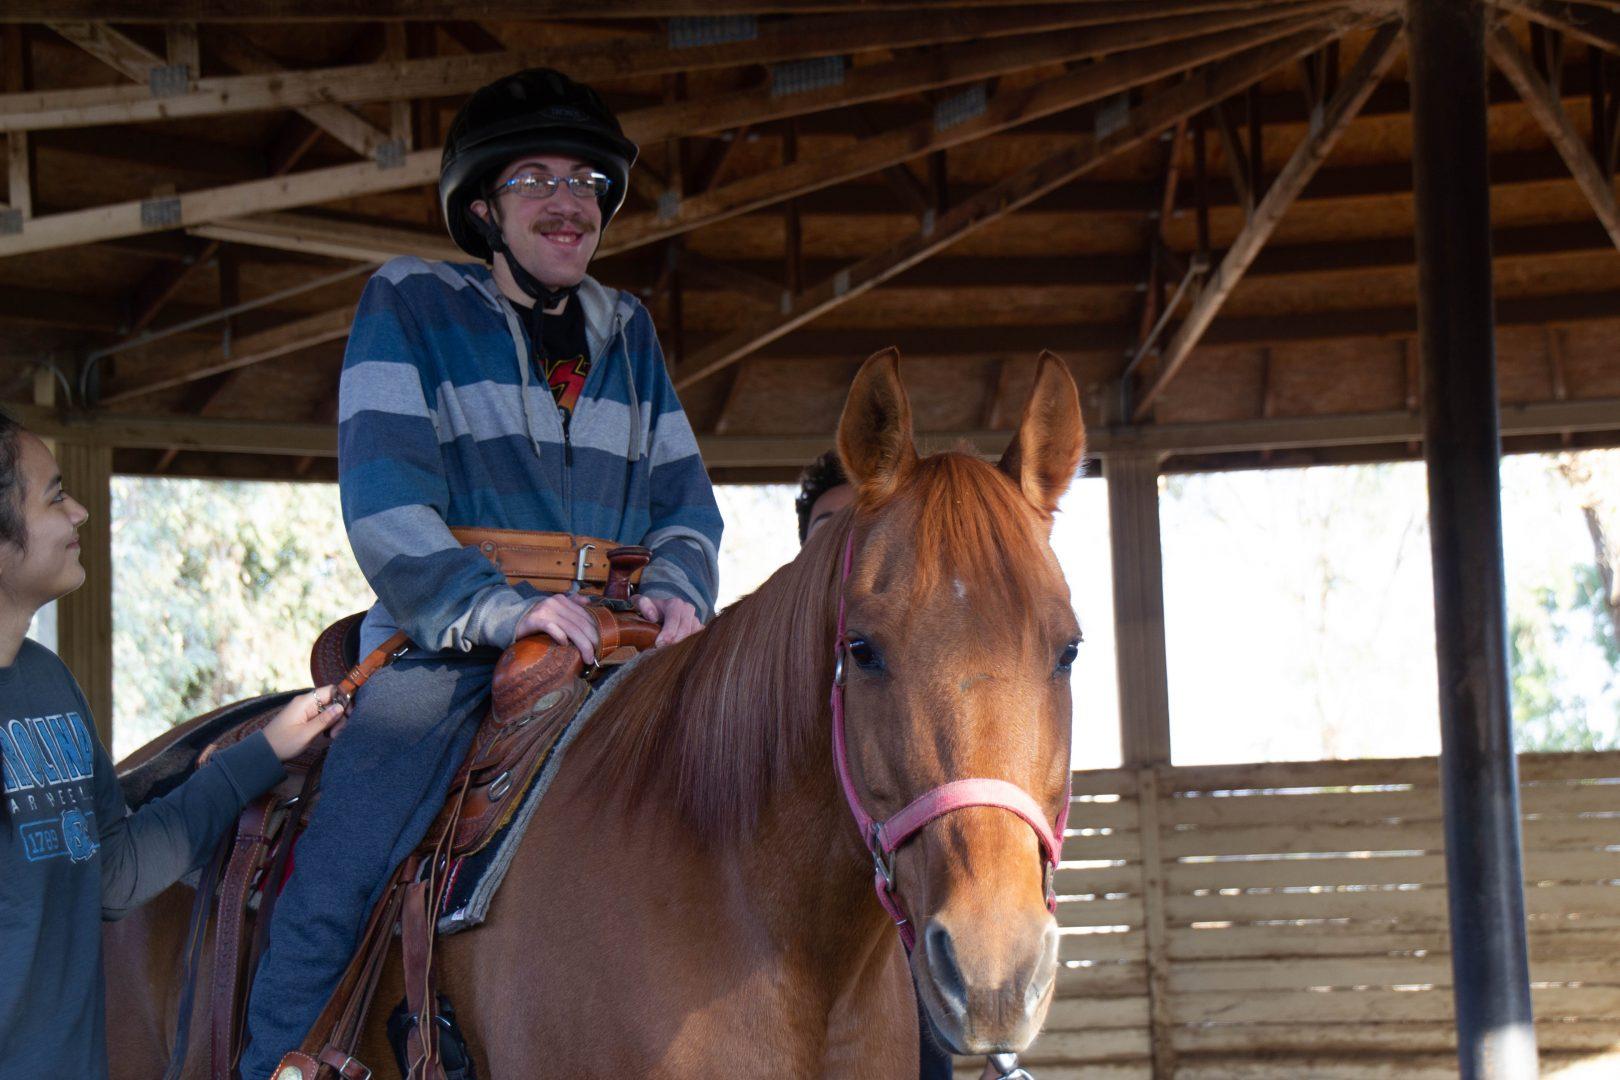 Michael+McFadden%2C+who+was+diagnosed+with+several+illnesses+as+a+child%2C+rides+a+horse+at+the+Heart+of+the+Horse+Therapy+Ranch+on+Nov.+4.+%28Cassie+Richter%2FThe+Collegian%29